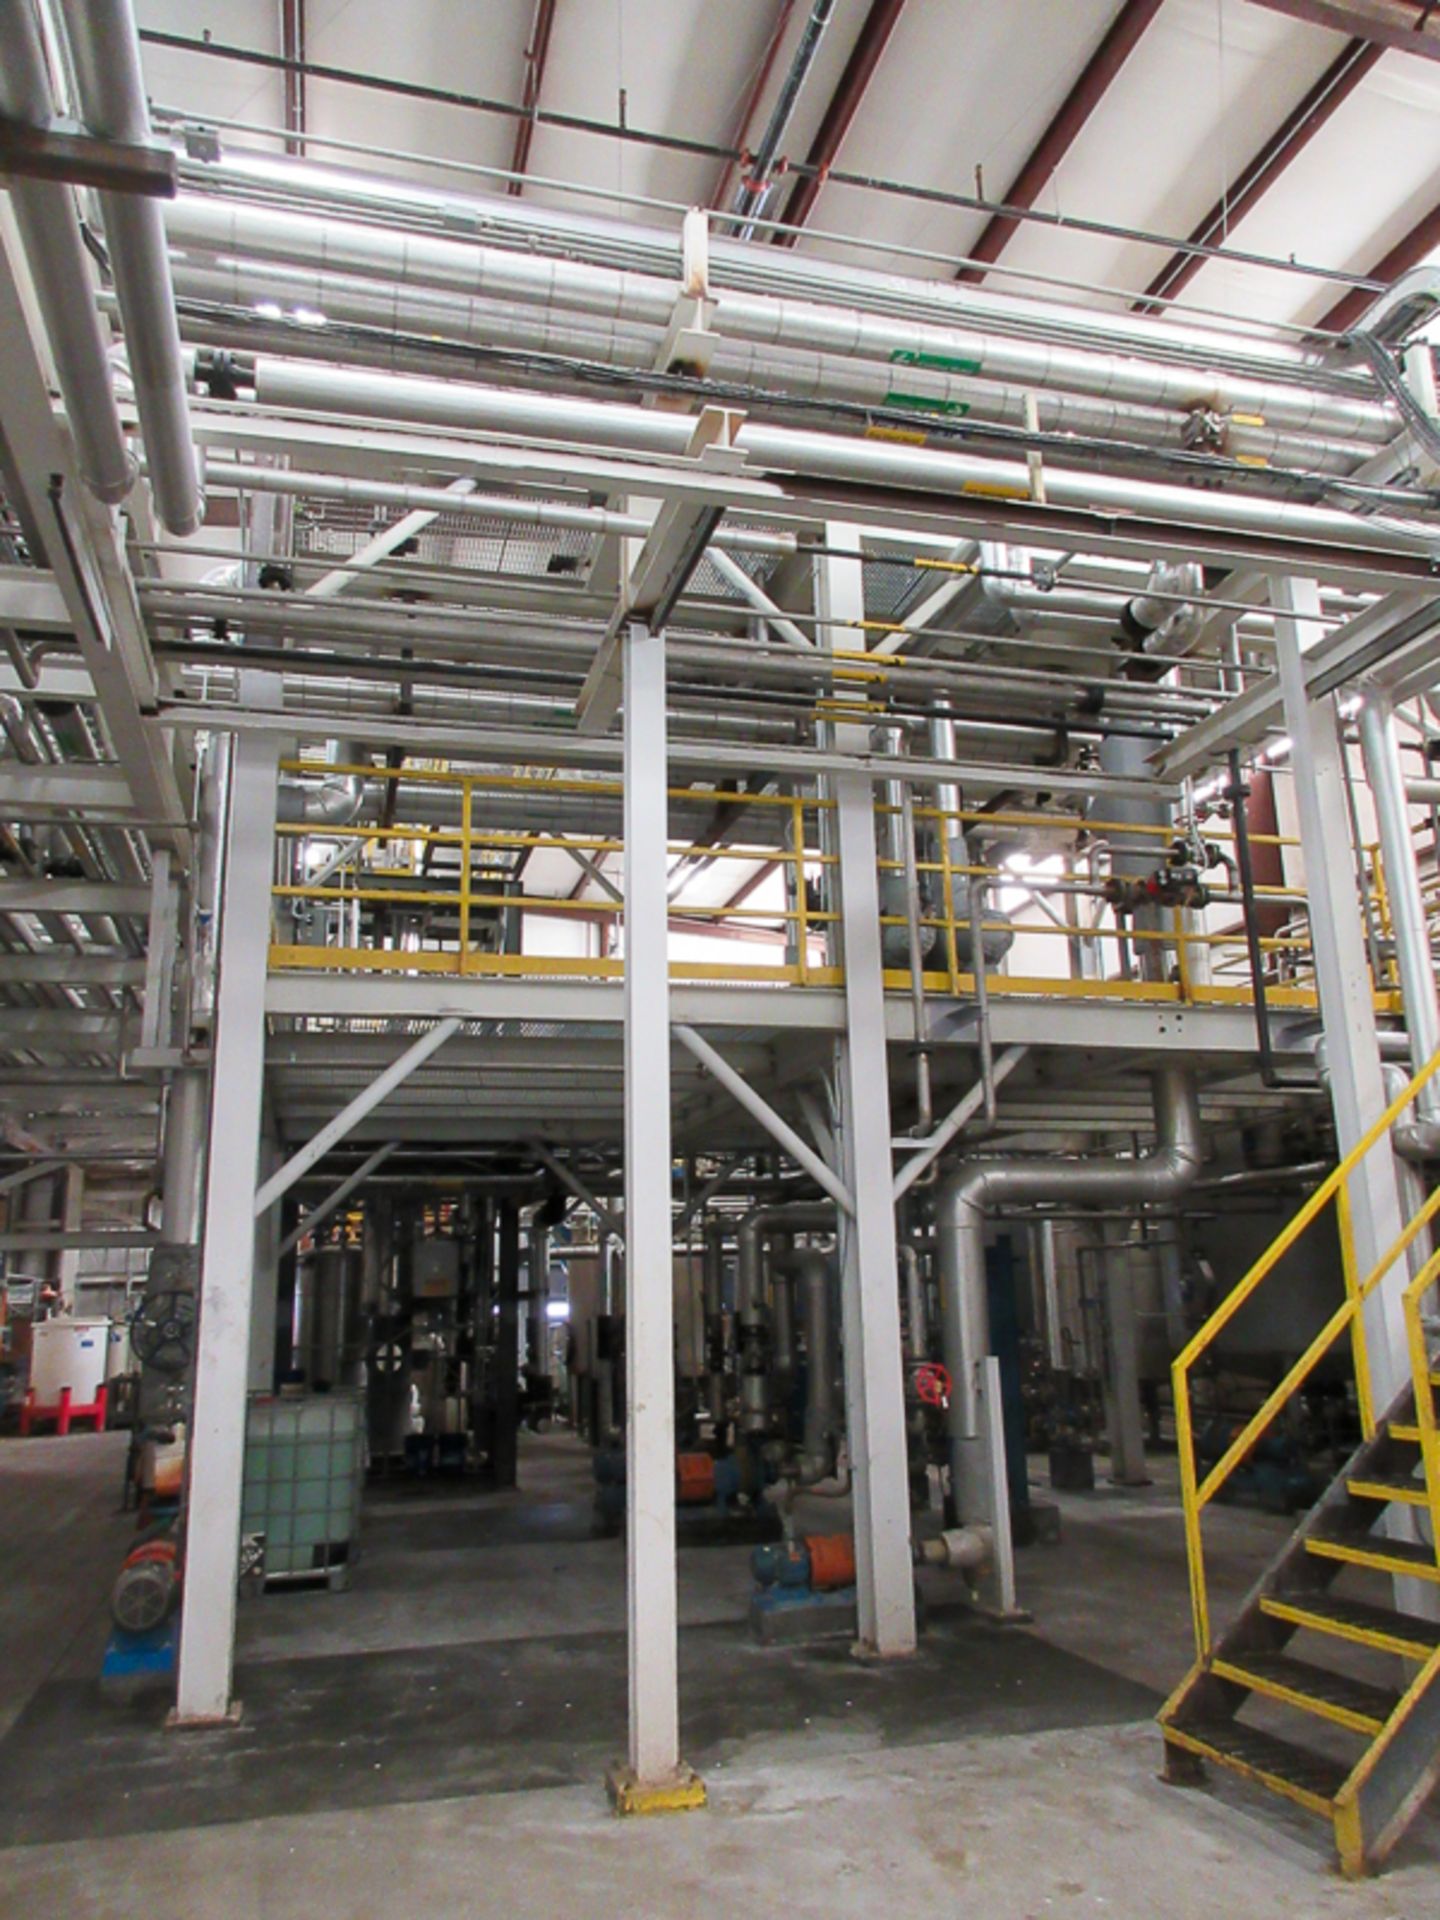 All Assets of a Former 10MGY Biodiesel Plant *********SOLD SUBJECT TO SELLER CONFIRMATION******* - Image 5 of 8